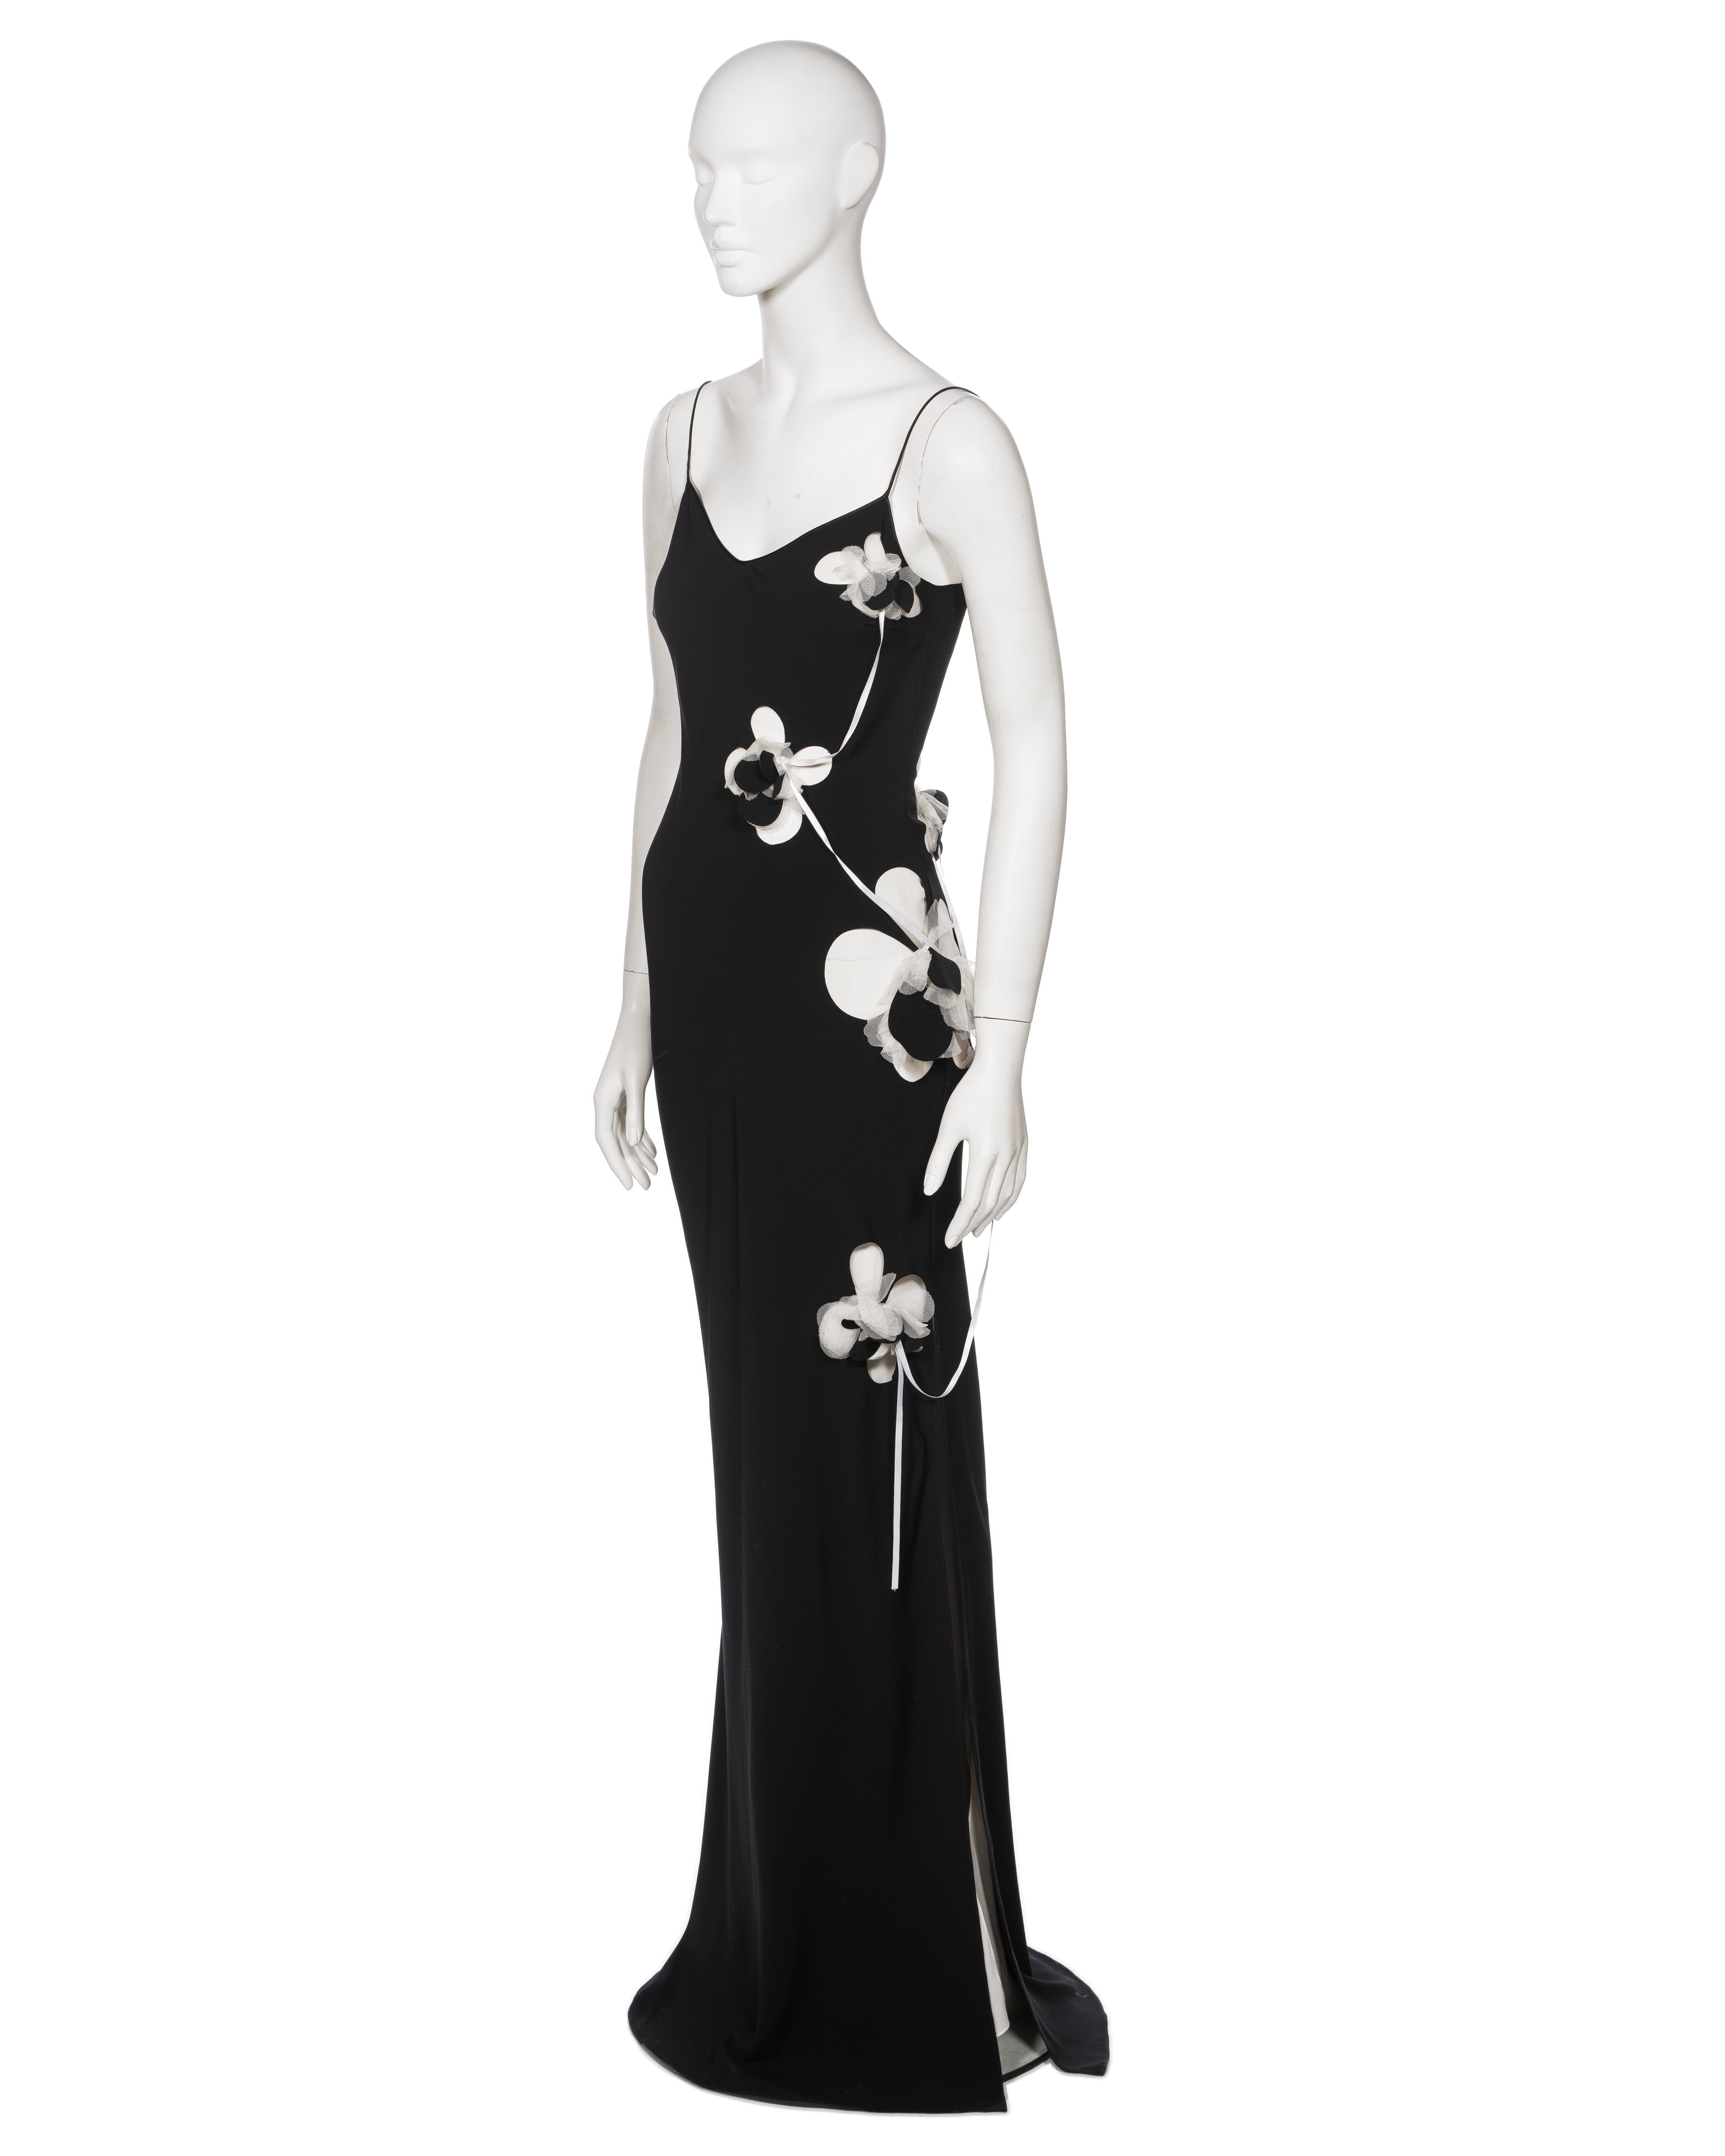 John Galliano Black Silk Slip Dress with Floral Appliqués and Ribbons, FW 2001 For Sale 5